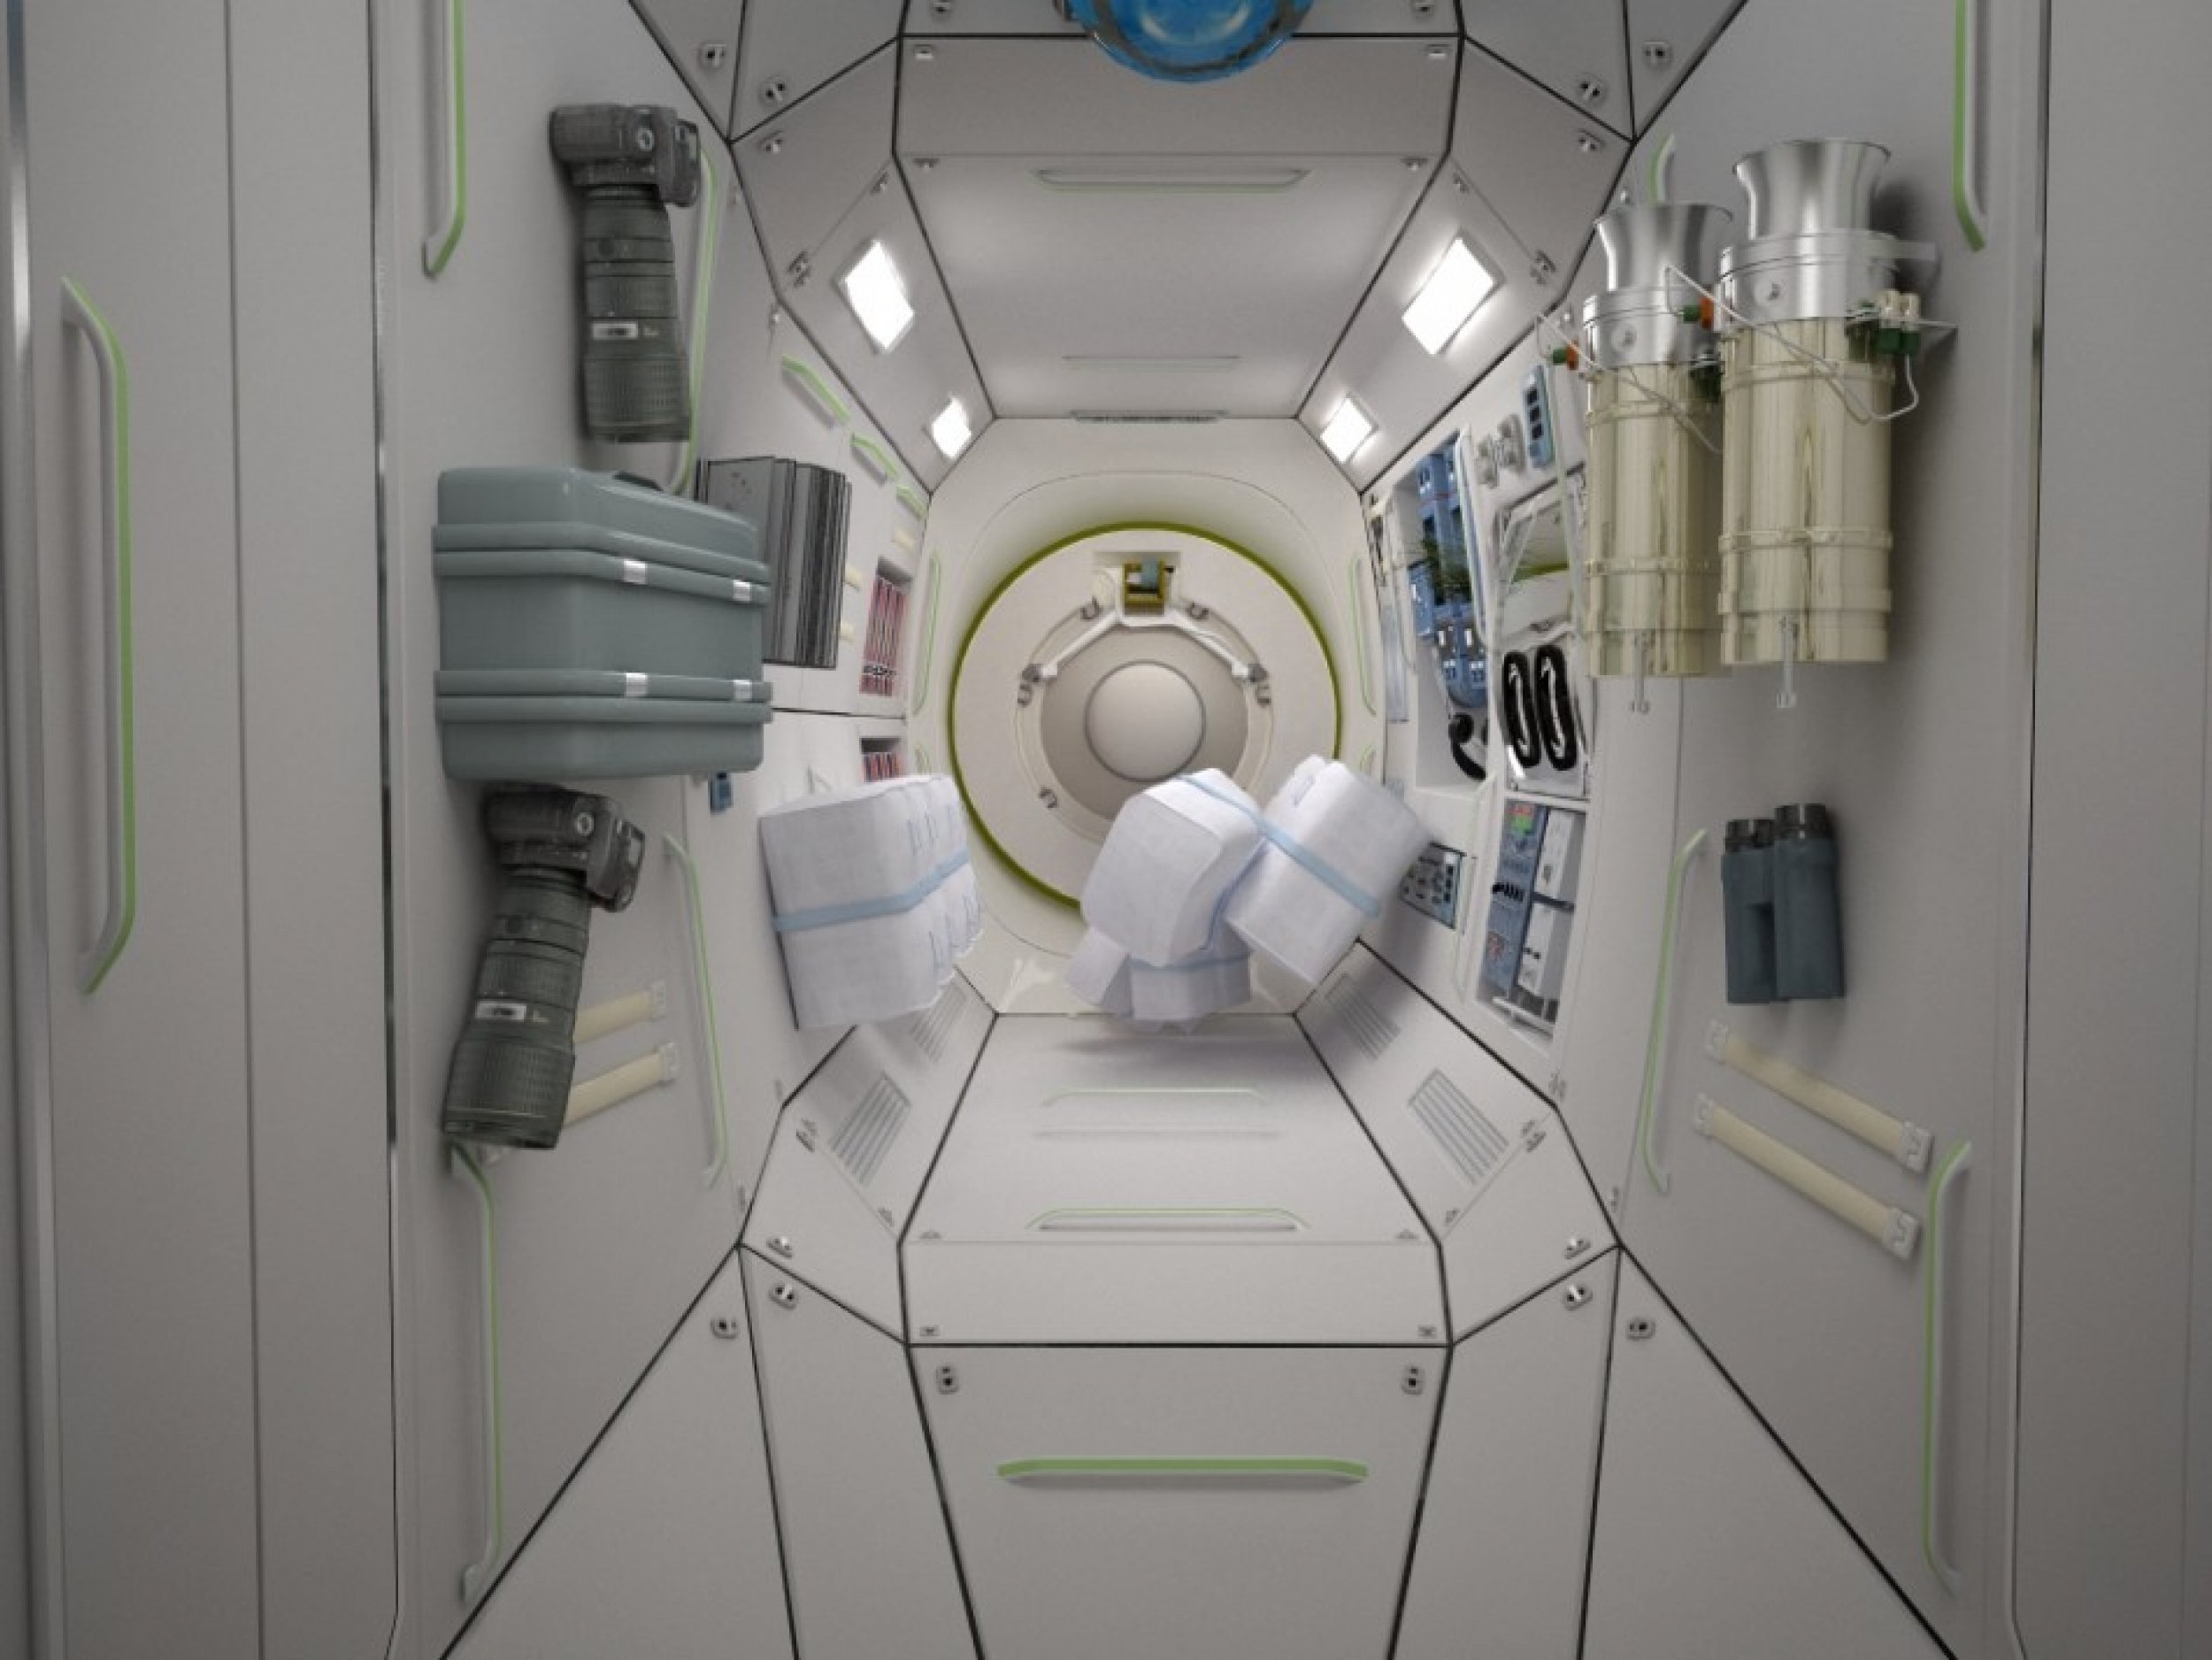 The Commercial Space Station